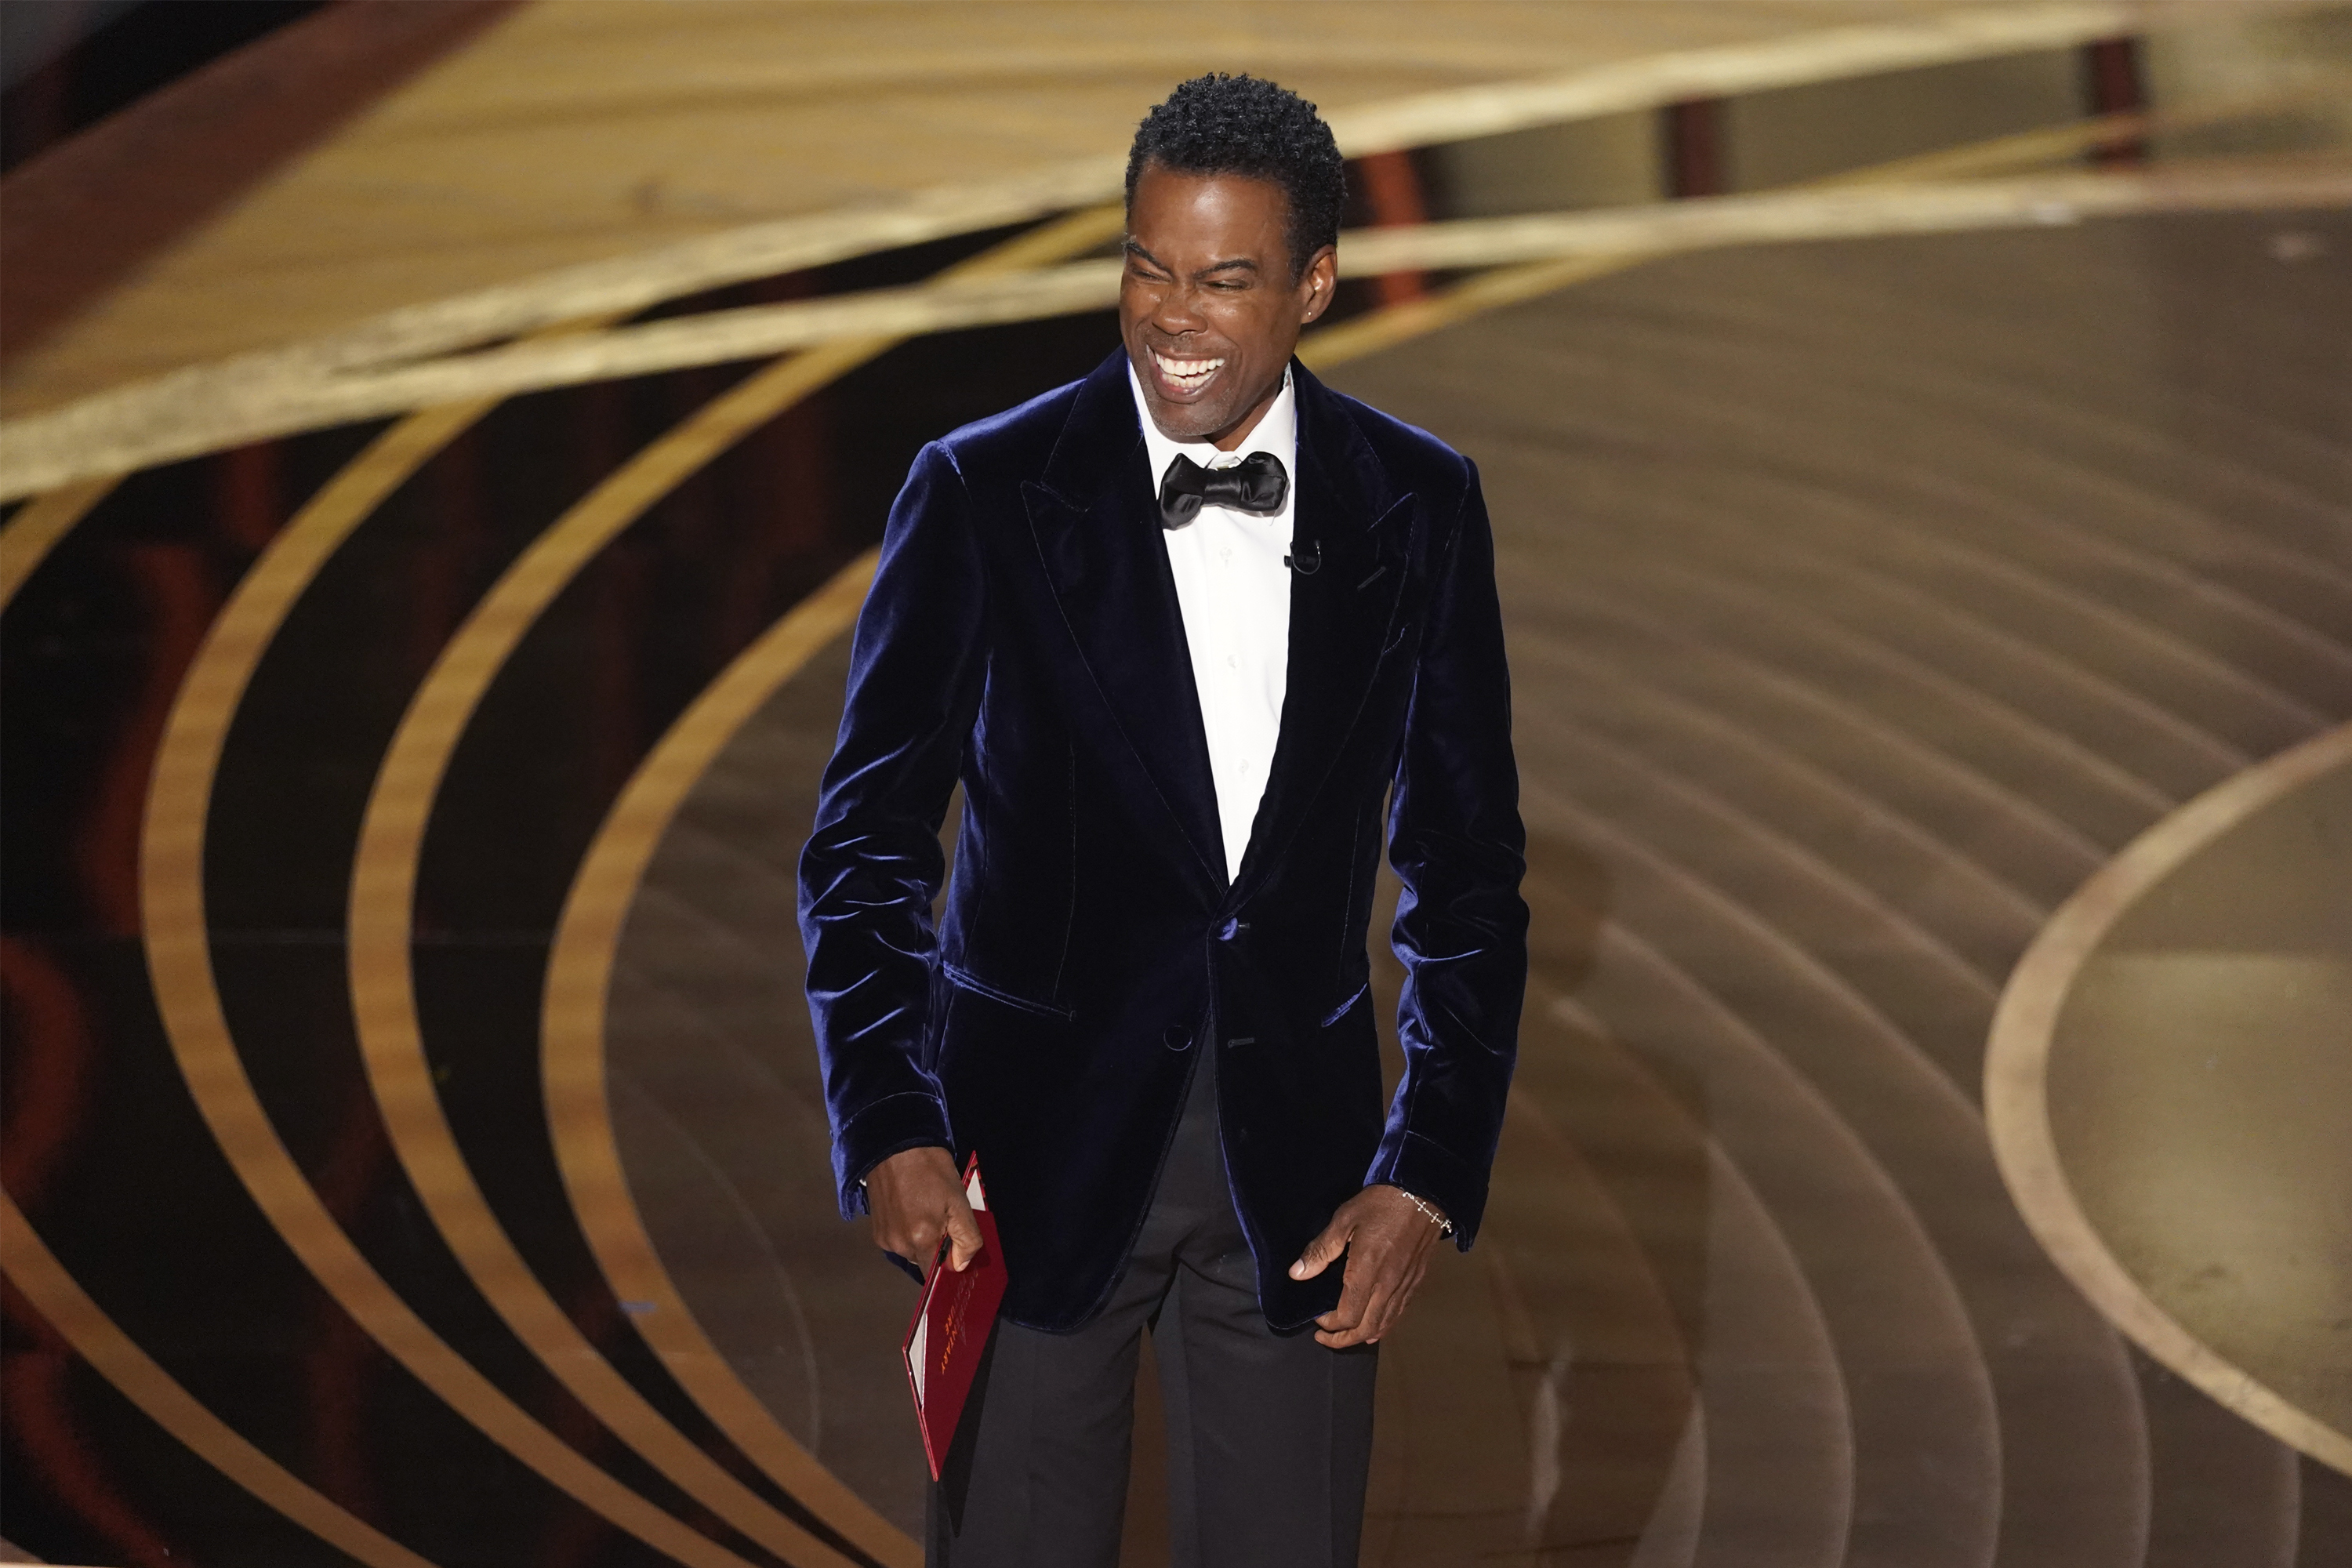 Chris Rock presents the award for best documentary feature at the Oscars on Sunday, March 27, 2022, at the Dolby Theatre in Los Angeles. (AP Photo/Chris Pizzello)